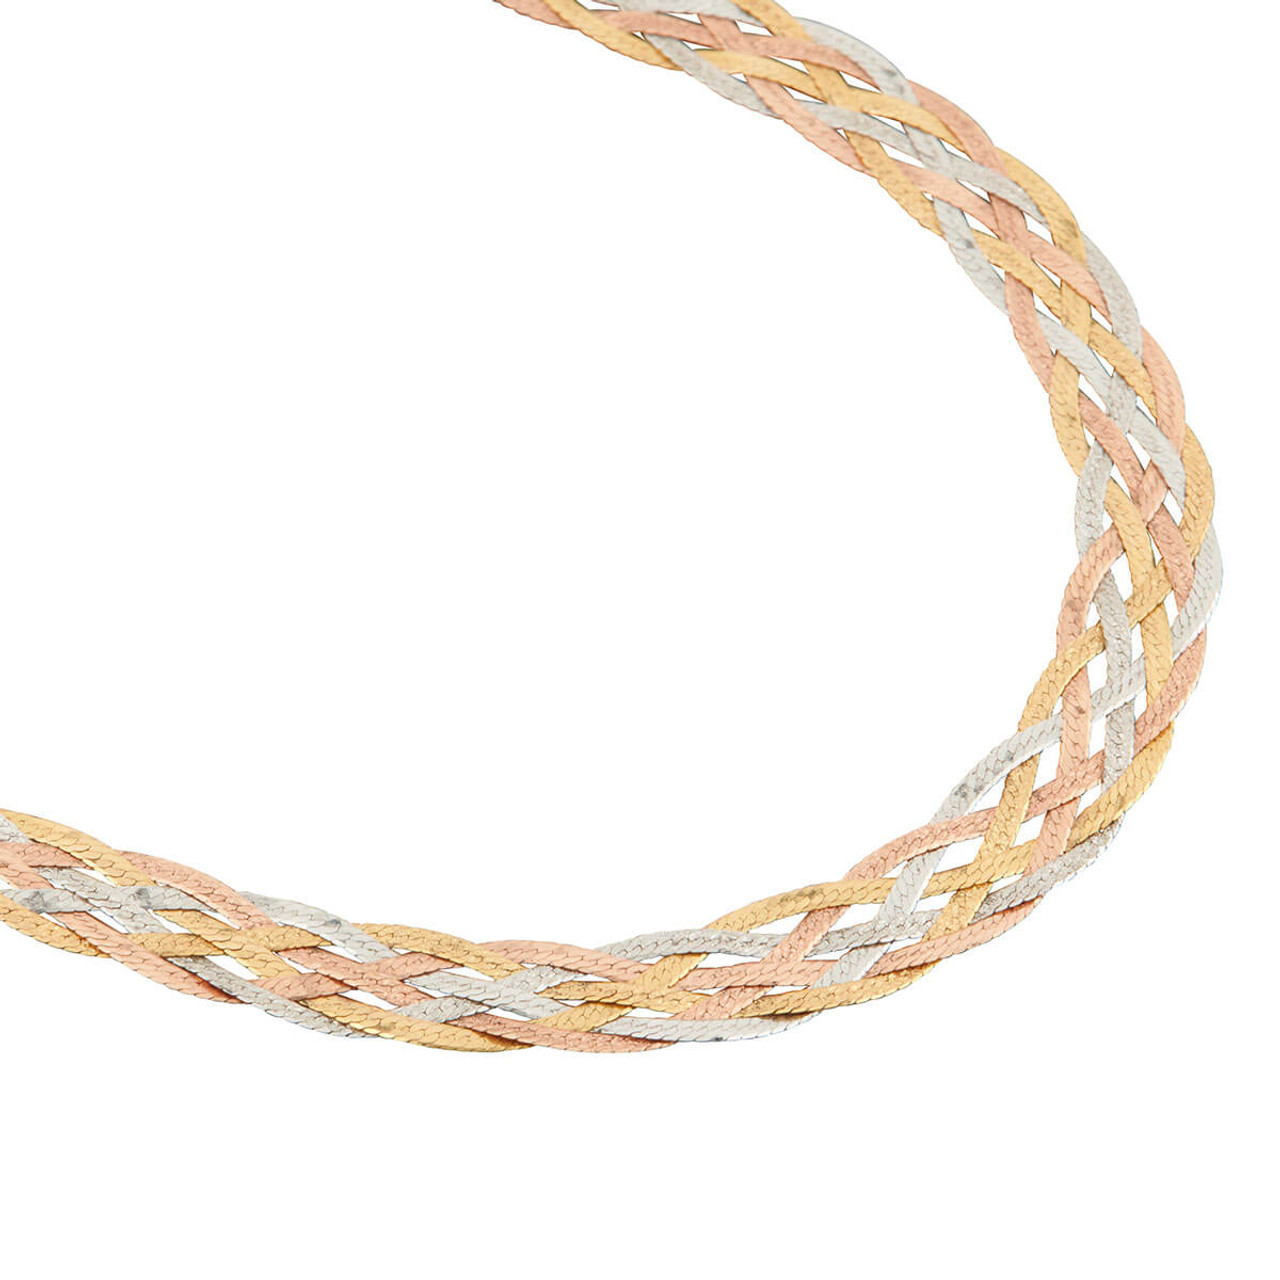 Three Colour Gold Triple Ring Interlocking Necklace by Avanti of Ashbourne